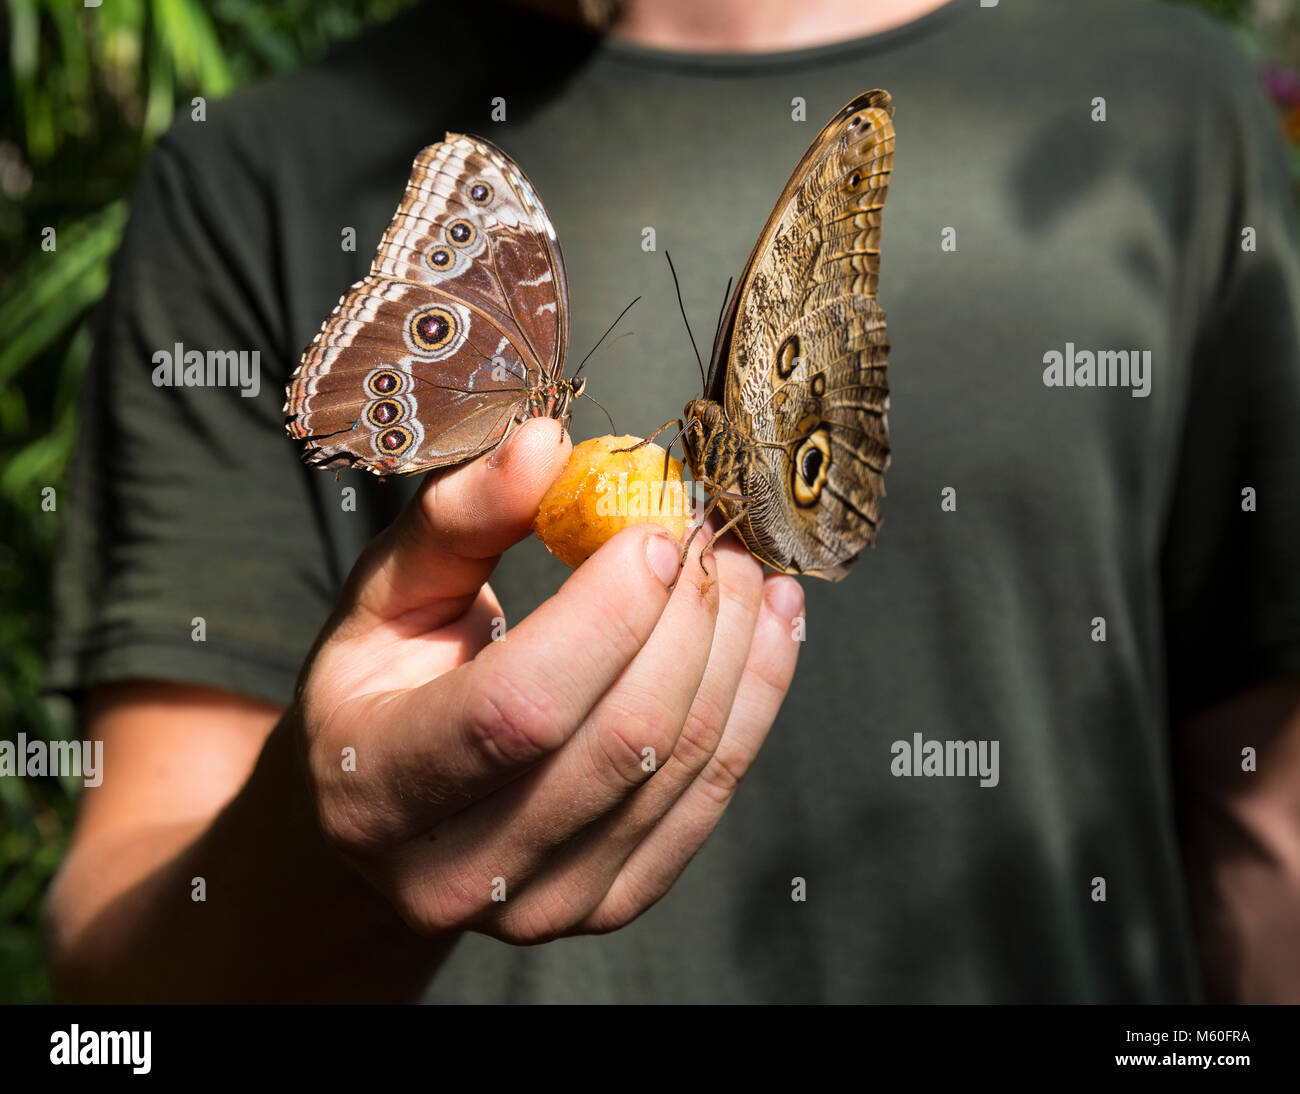 Morpho peleides butterfly (Peleides blue morpho) feeding on a piece of fruit held in a man's hand, Vienna butterfly house, Austria. Stock Photo